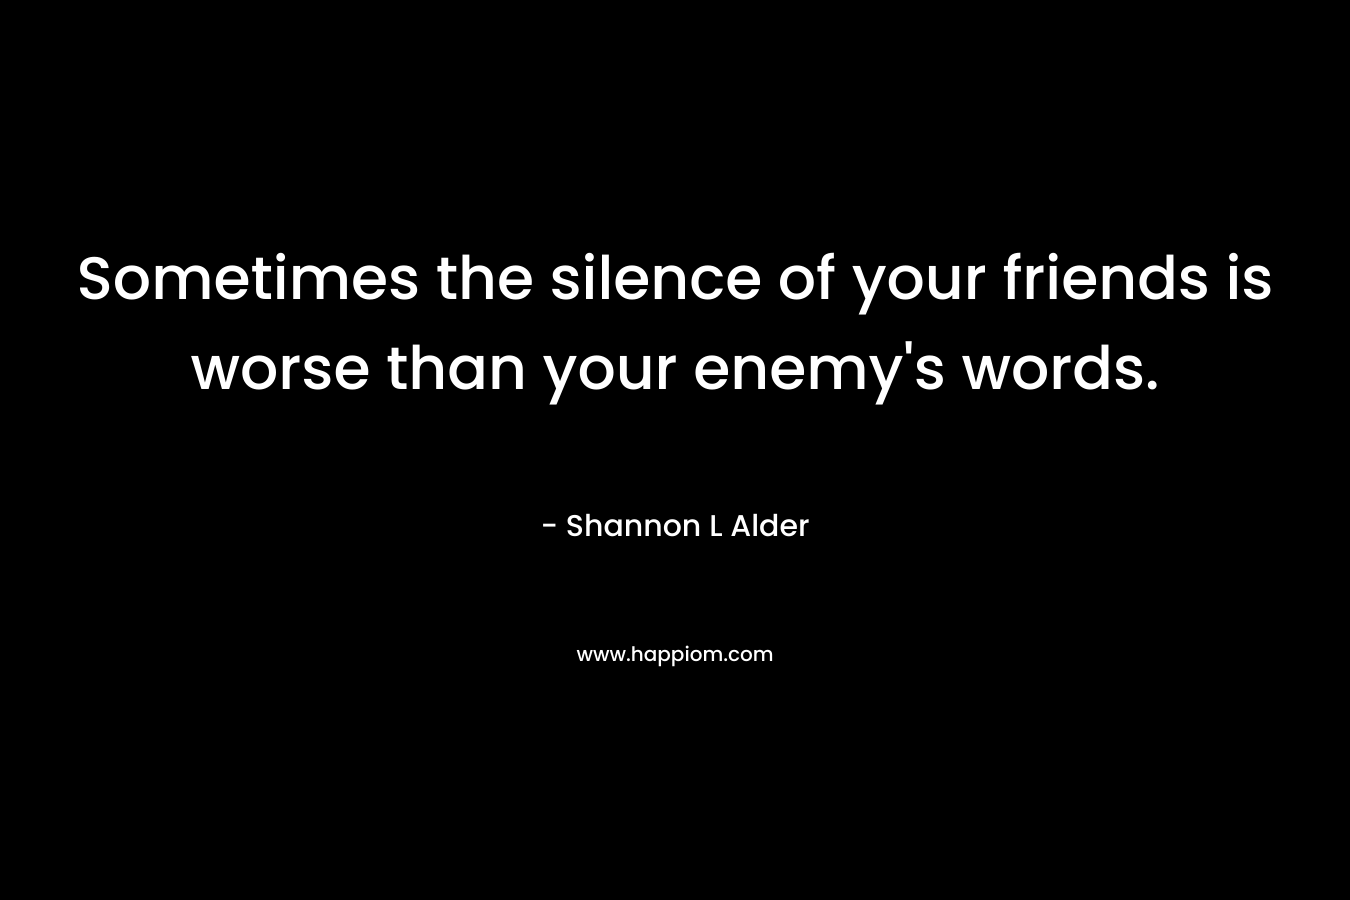 Sometimes the silence of your friends is worse than your enemy’s words. – Shannon L Alder